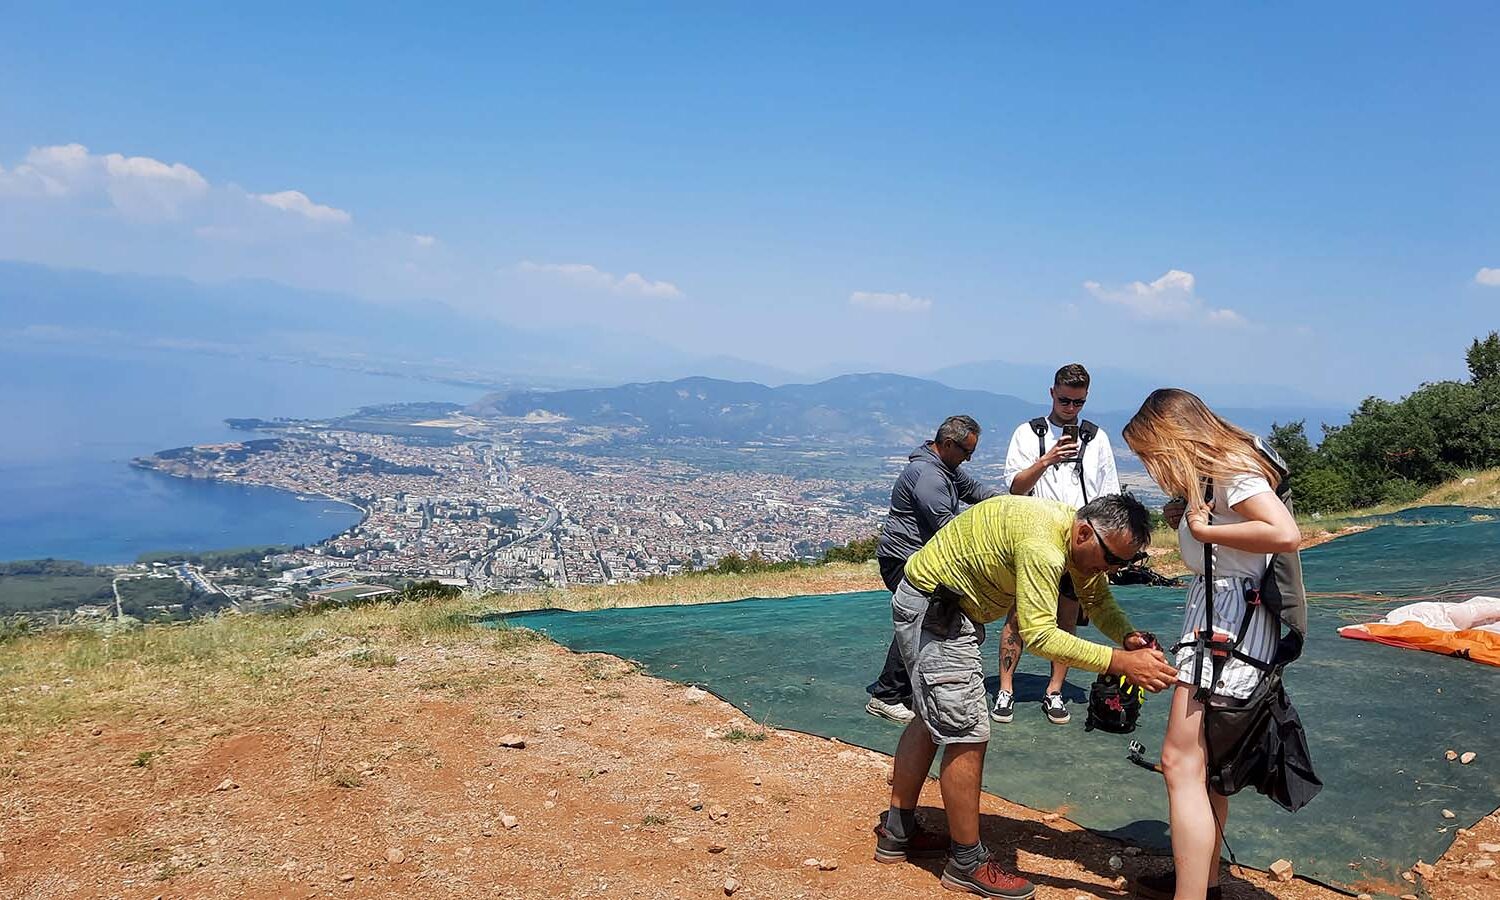 Paragliding Ohrid - preparation At the Takeoff